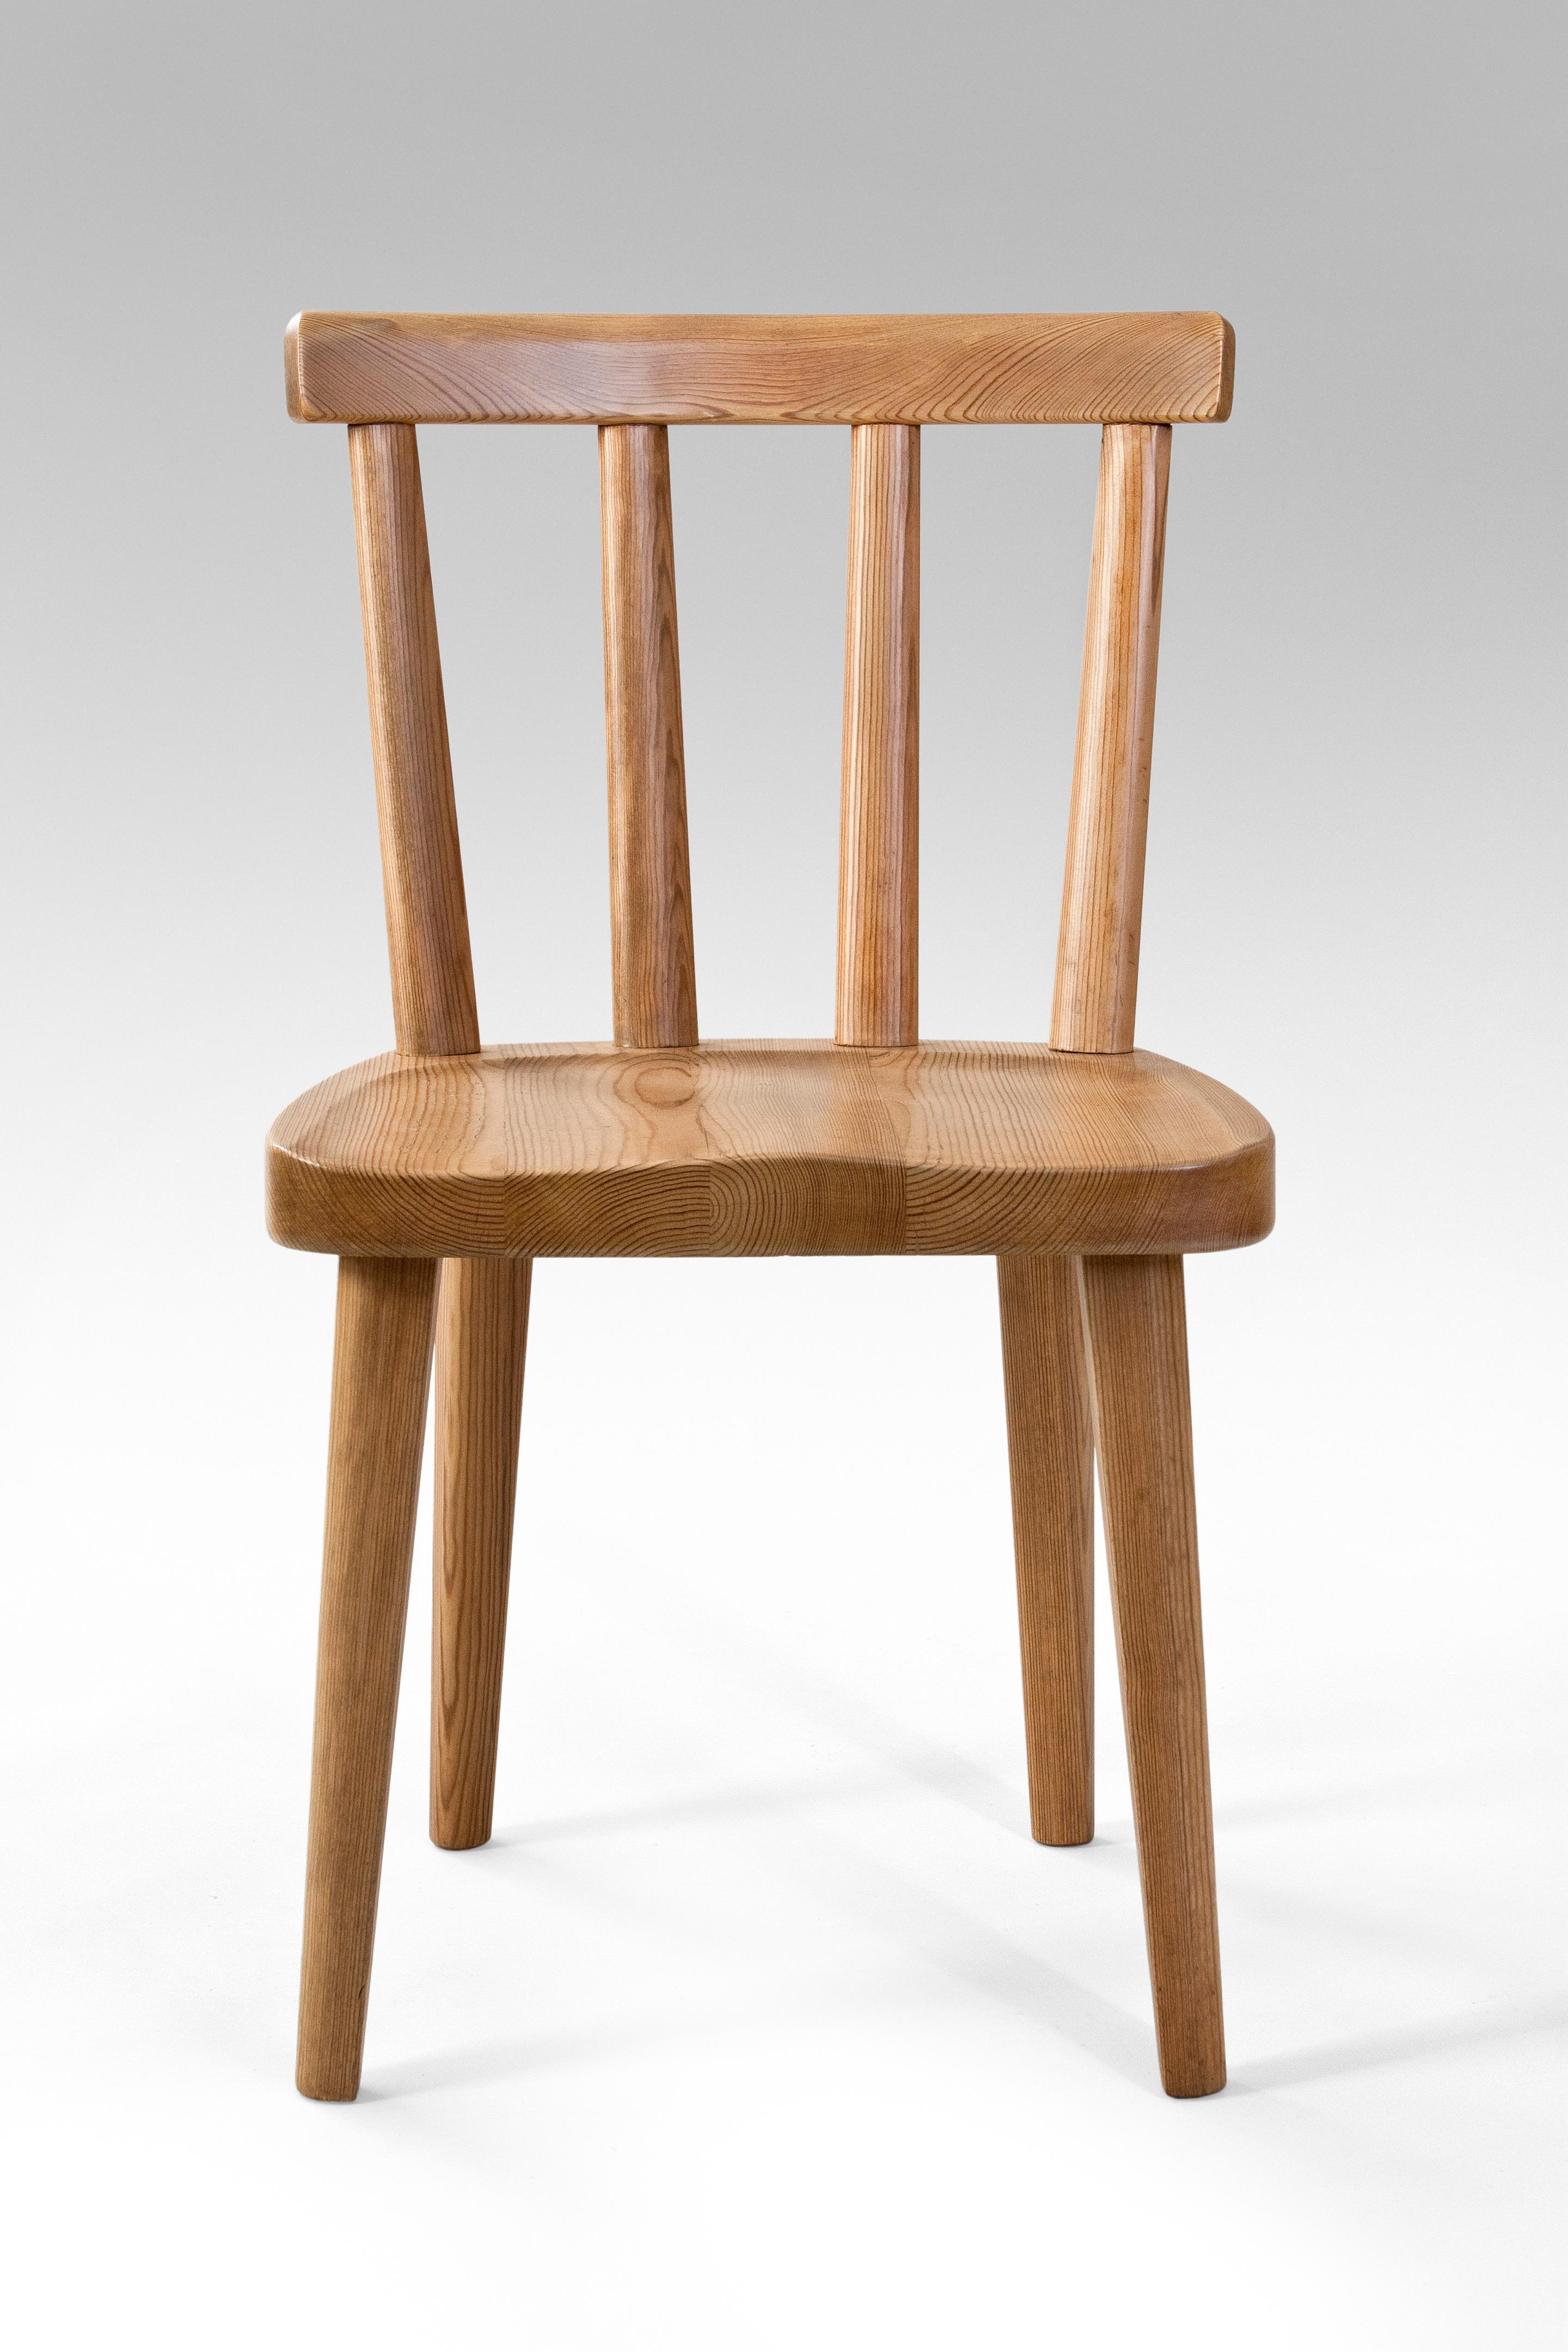 Axel-Einar Hjorth, a set of ten Swedish pine Utö chairs
for Nordiska Kompaniet,
circa 1930.
The concave top rail raised on four rounded back splats, above a contoured seat, terminating in tapering rounded legs.
Total of ten chairs available. We